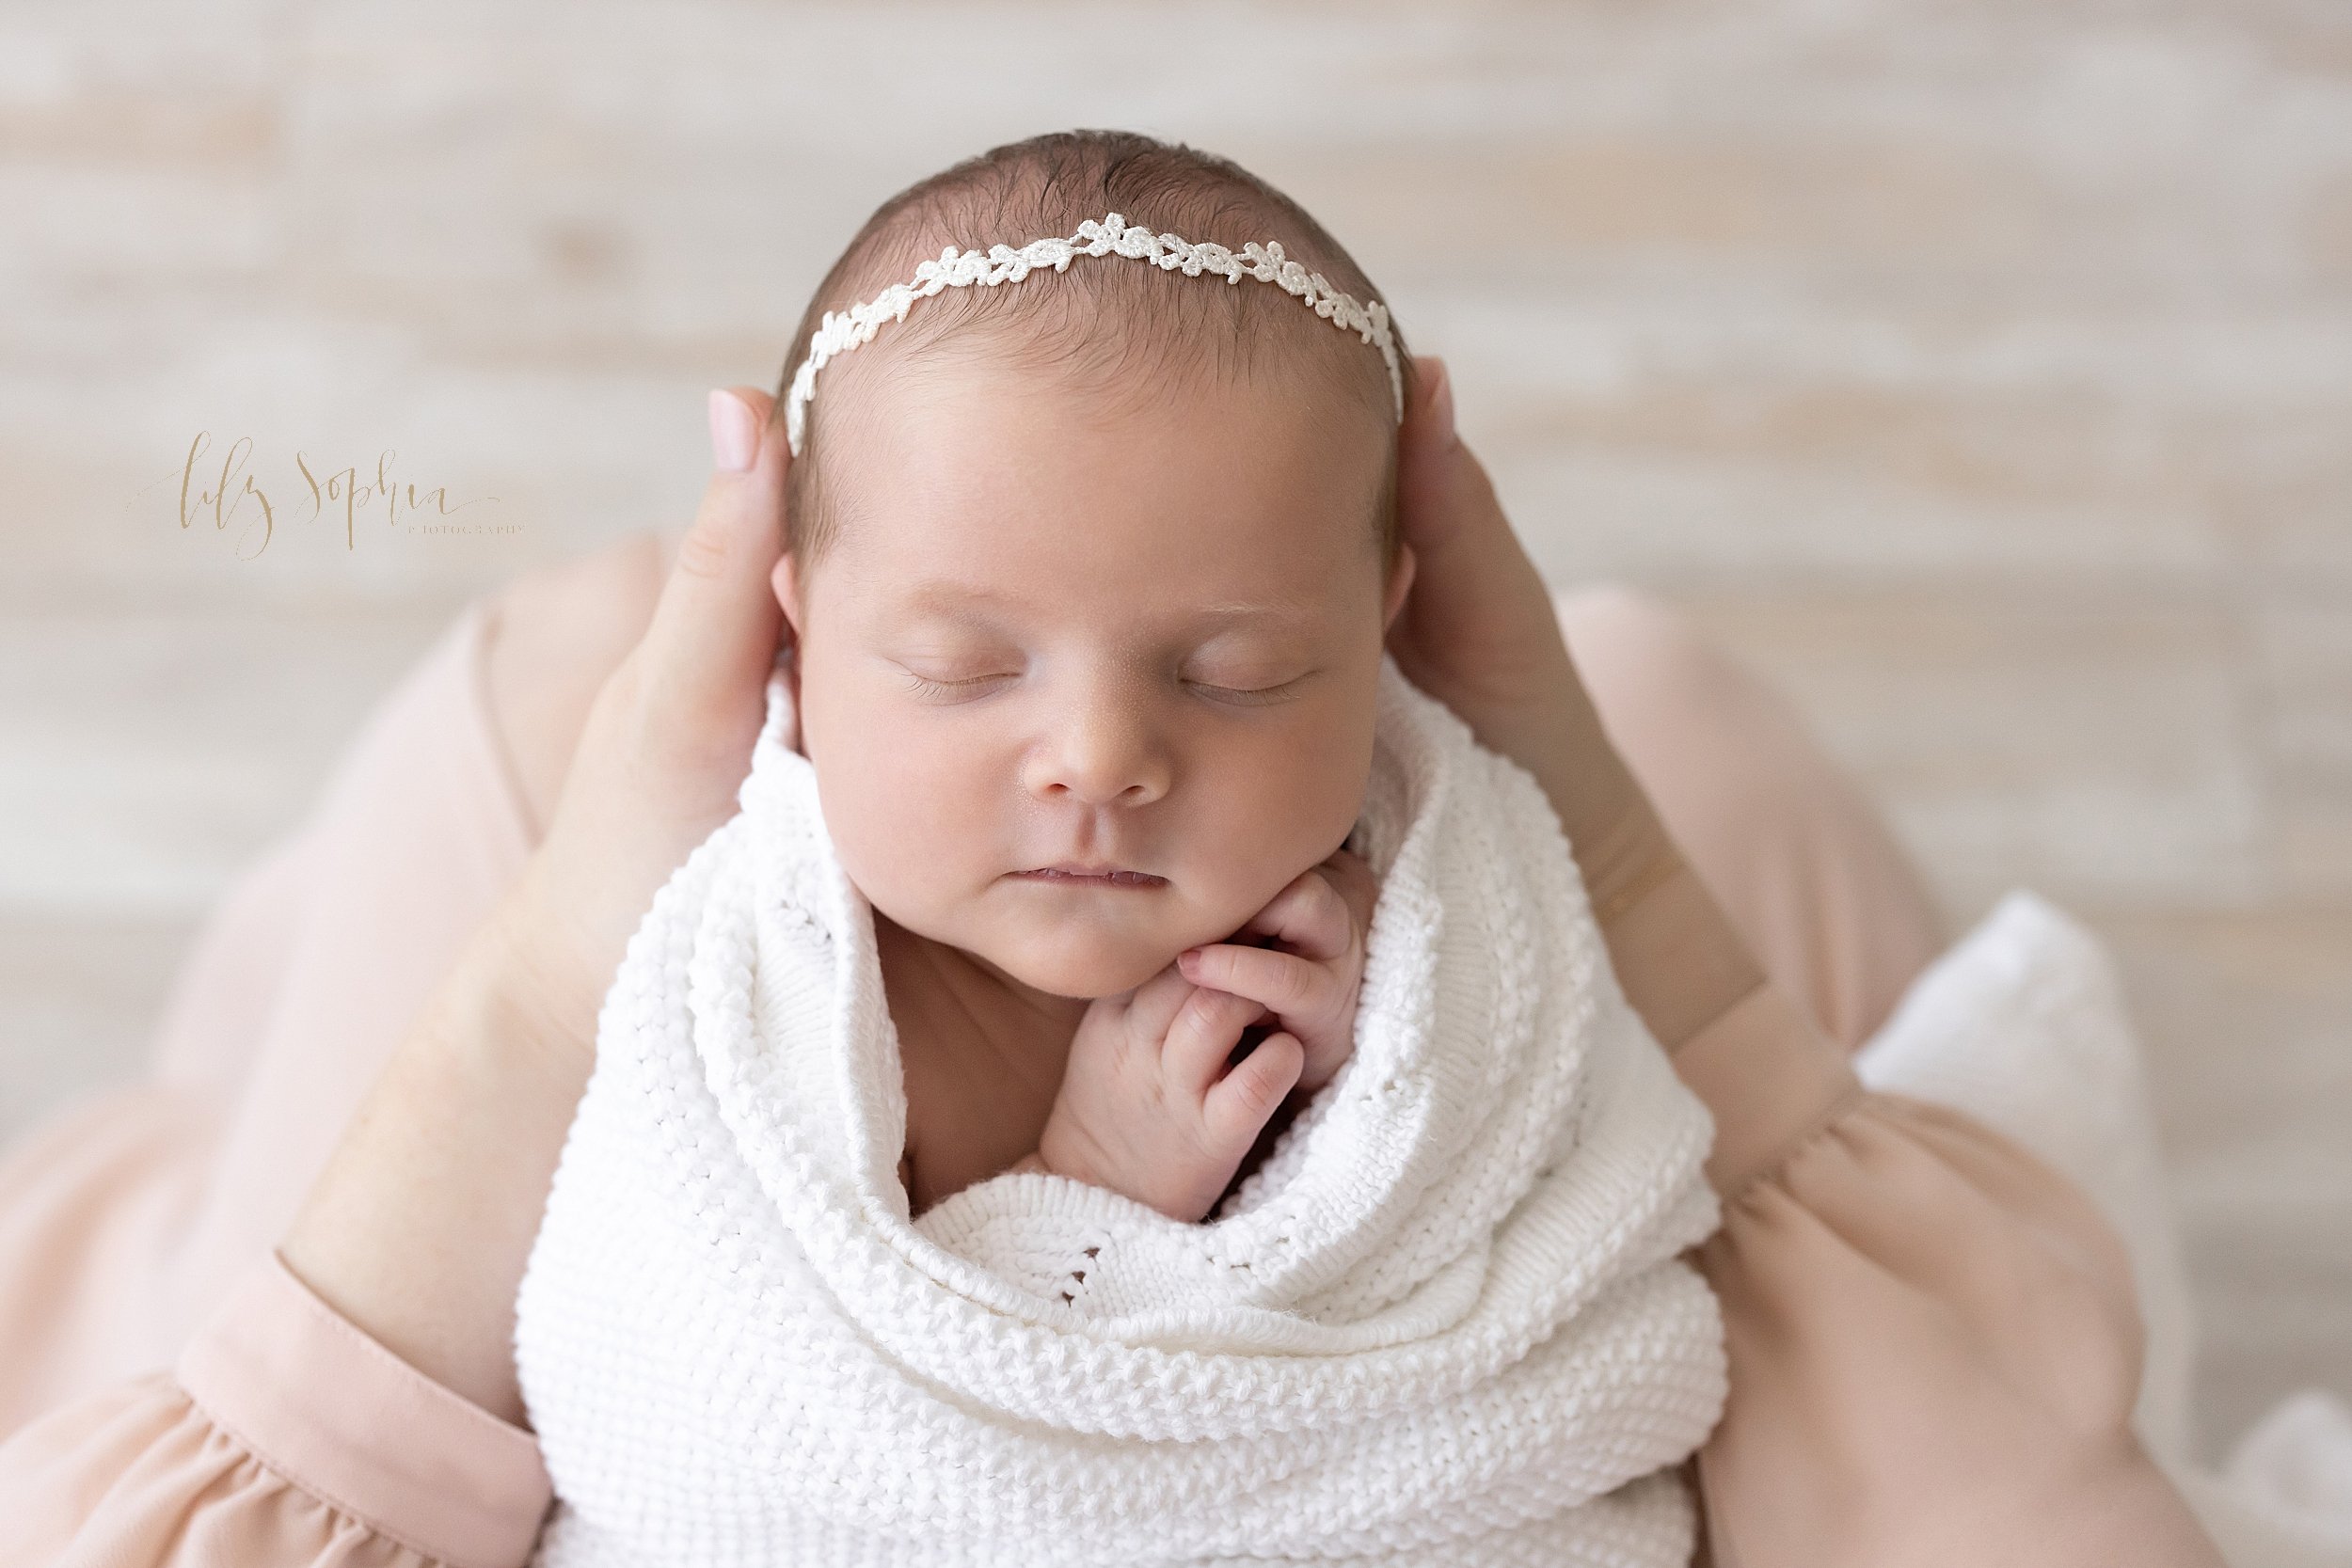  Newborn portrait of a peacefully sleeping baby girl wearing a delicate laurel headband in her hair as head is held in her mother’s hands taken in a natural light studio near Ansley Park in Atlanta. 